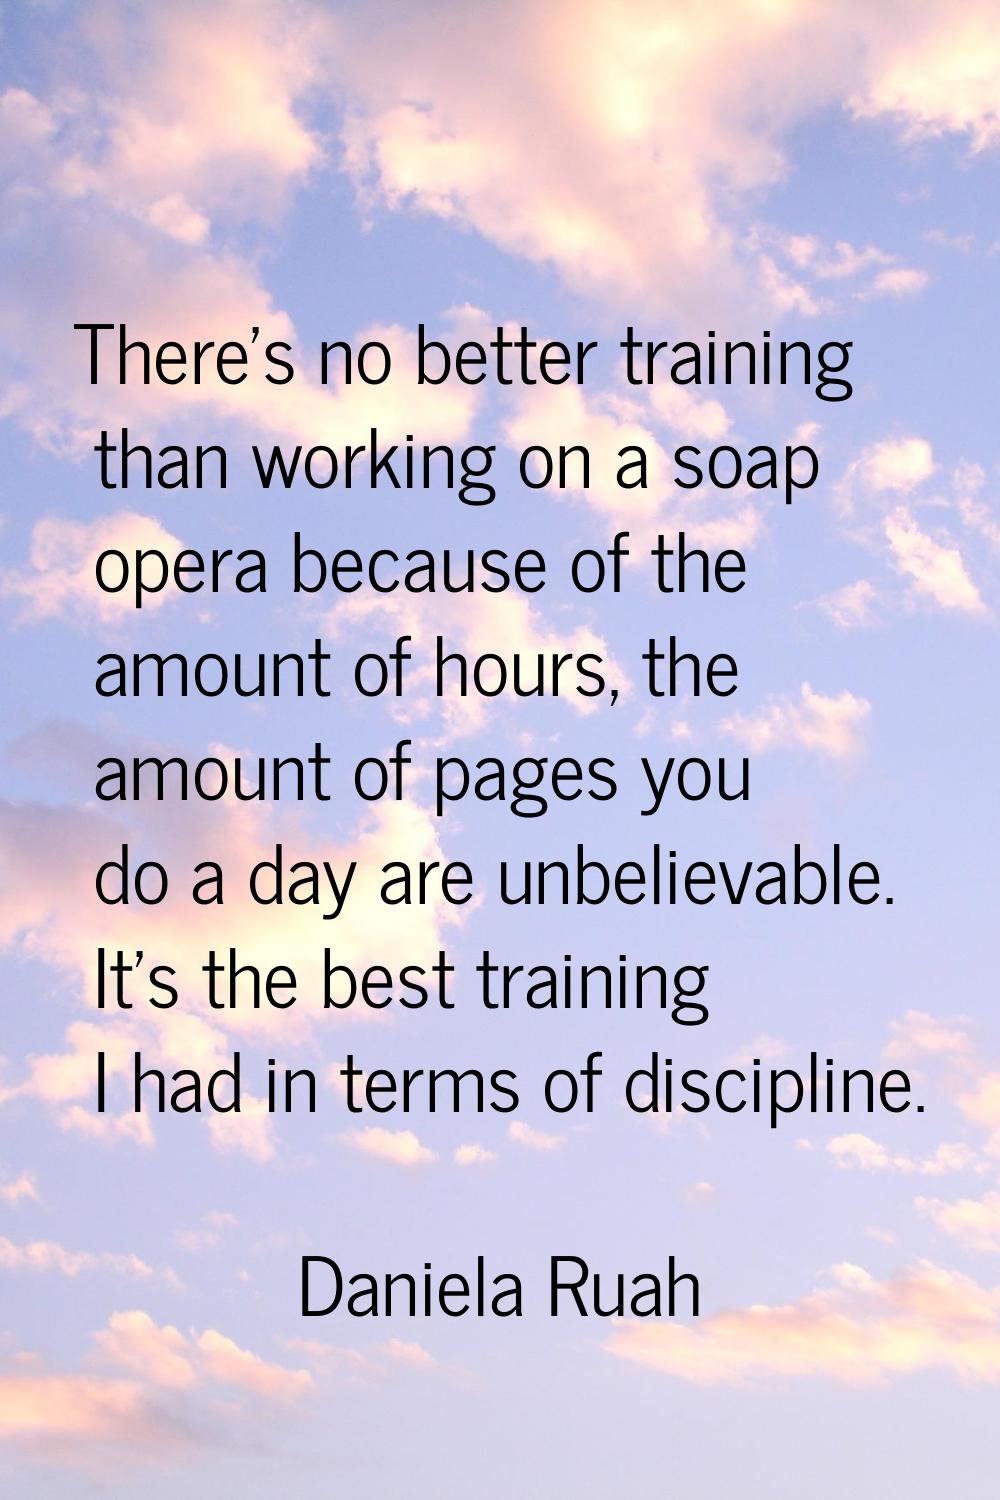 There's no better training than working on a soap opera because of the amount of hours, the amount 